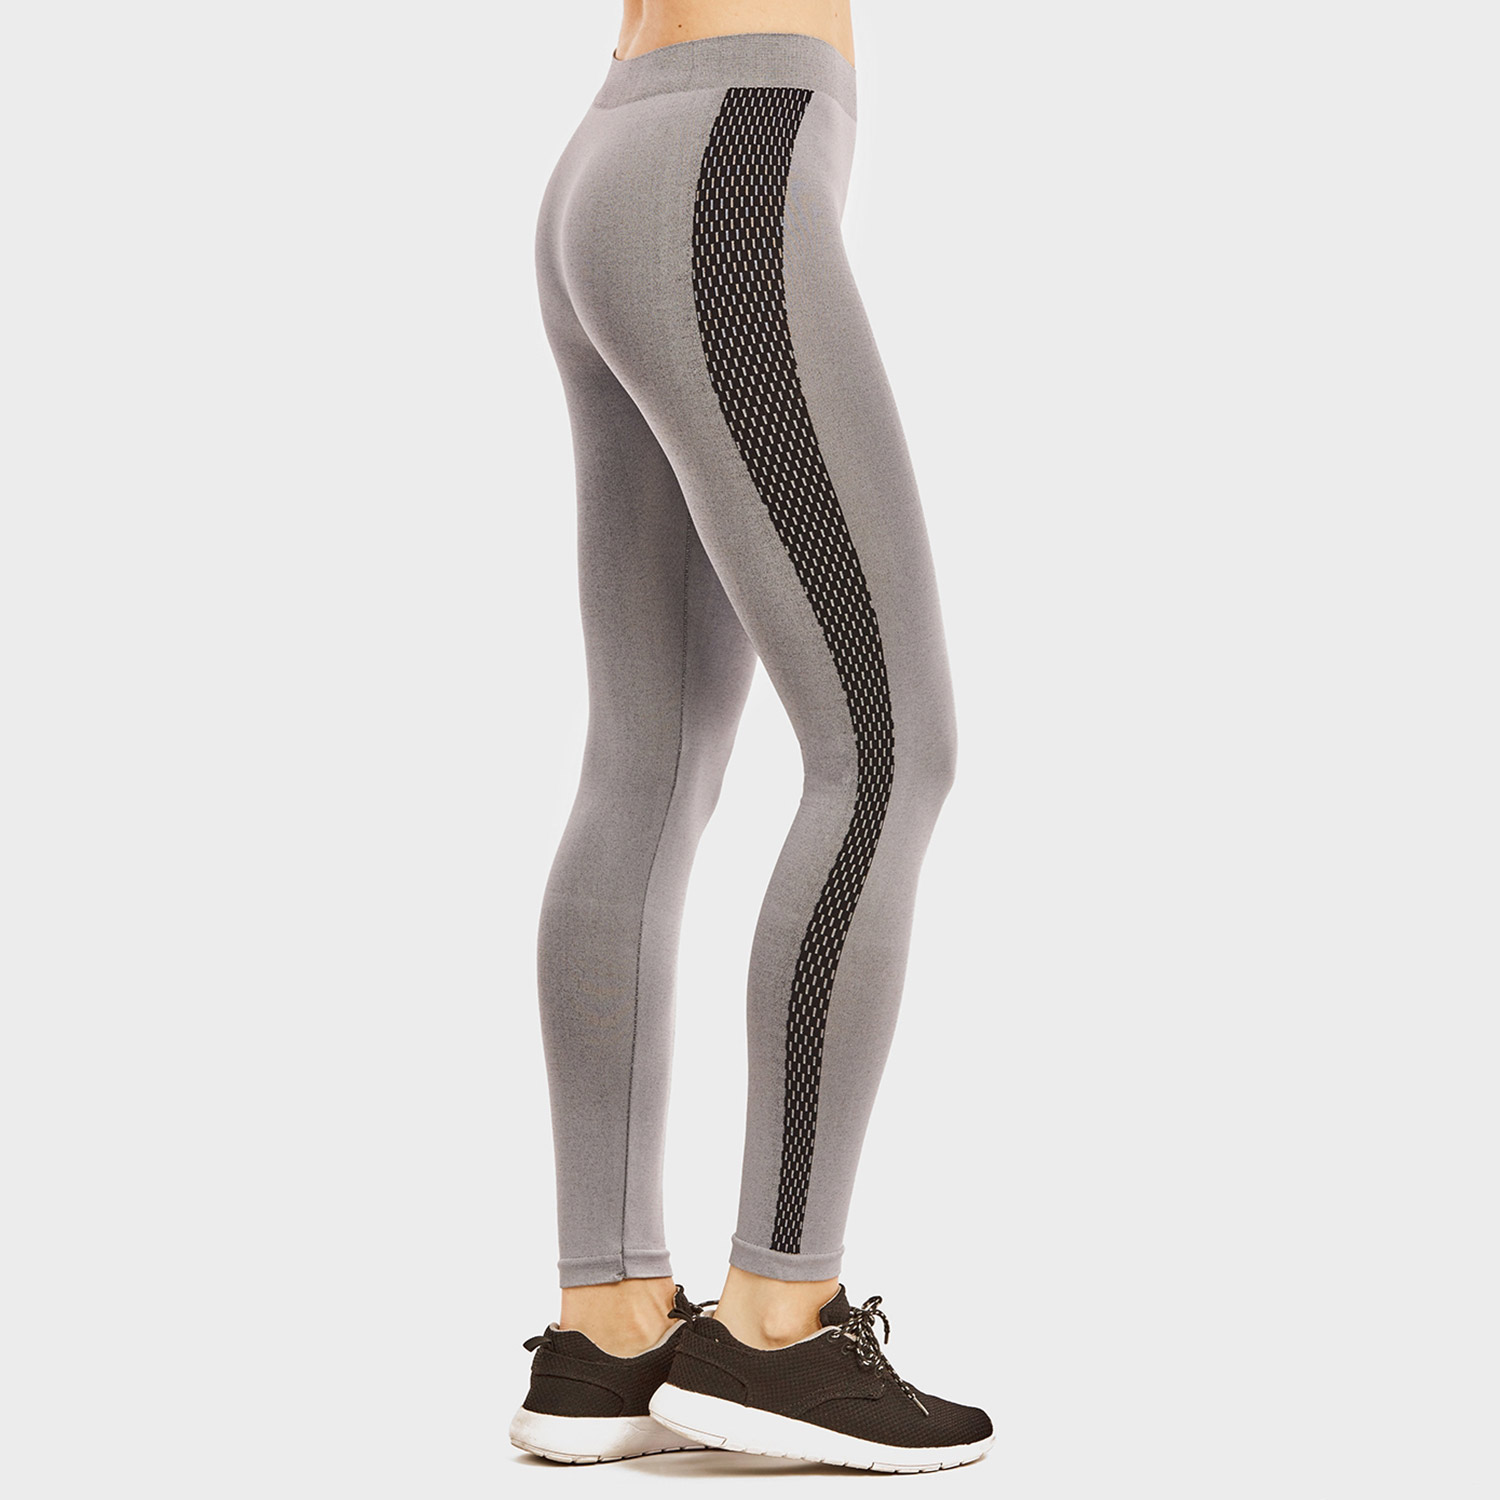 5 Pack Ladies Seamless Legging With Knitted Design